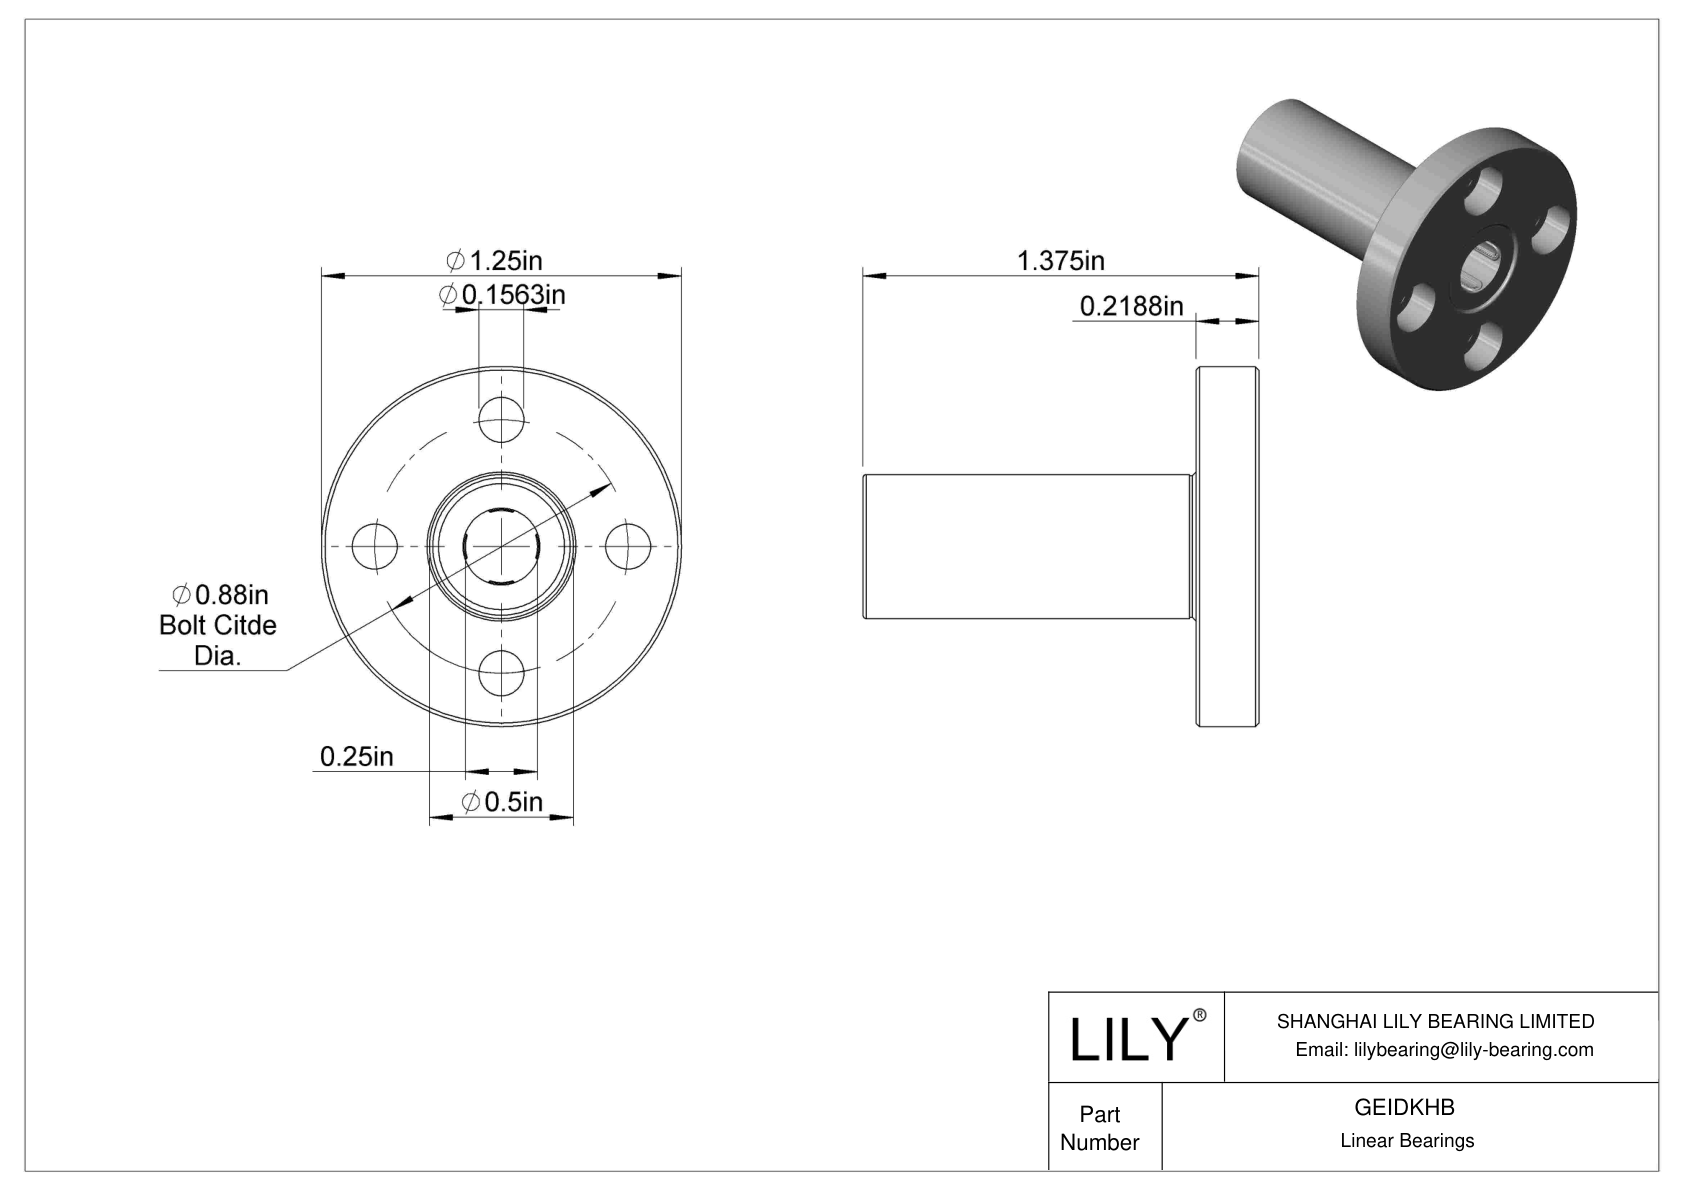 GEIDKHB Flange-Mounted Linear Ball Bearings cad drawing